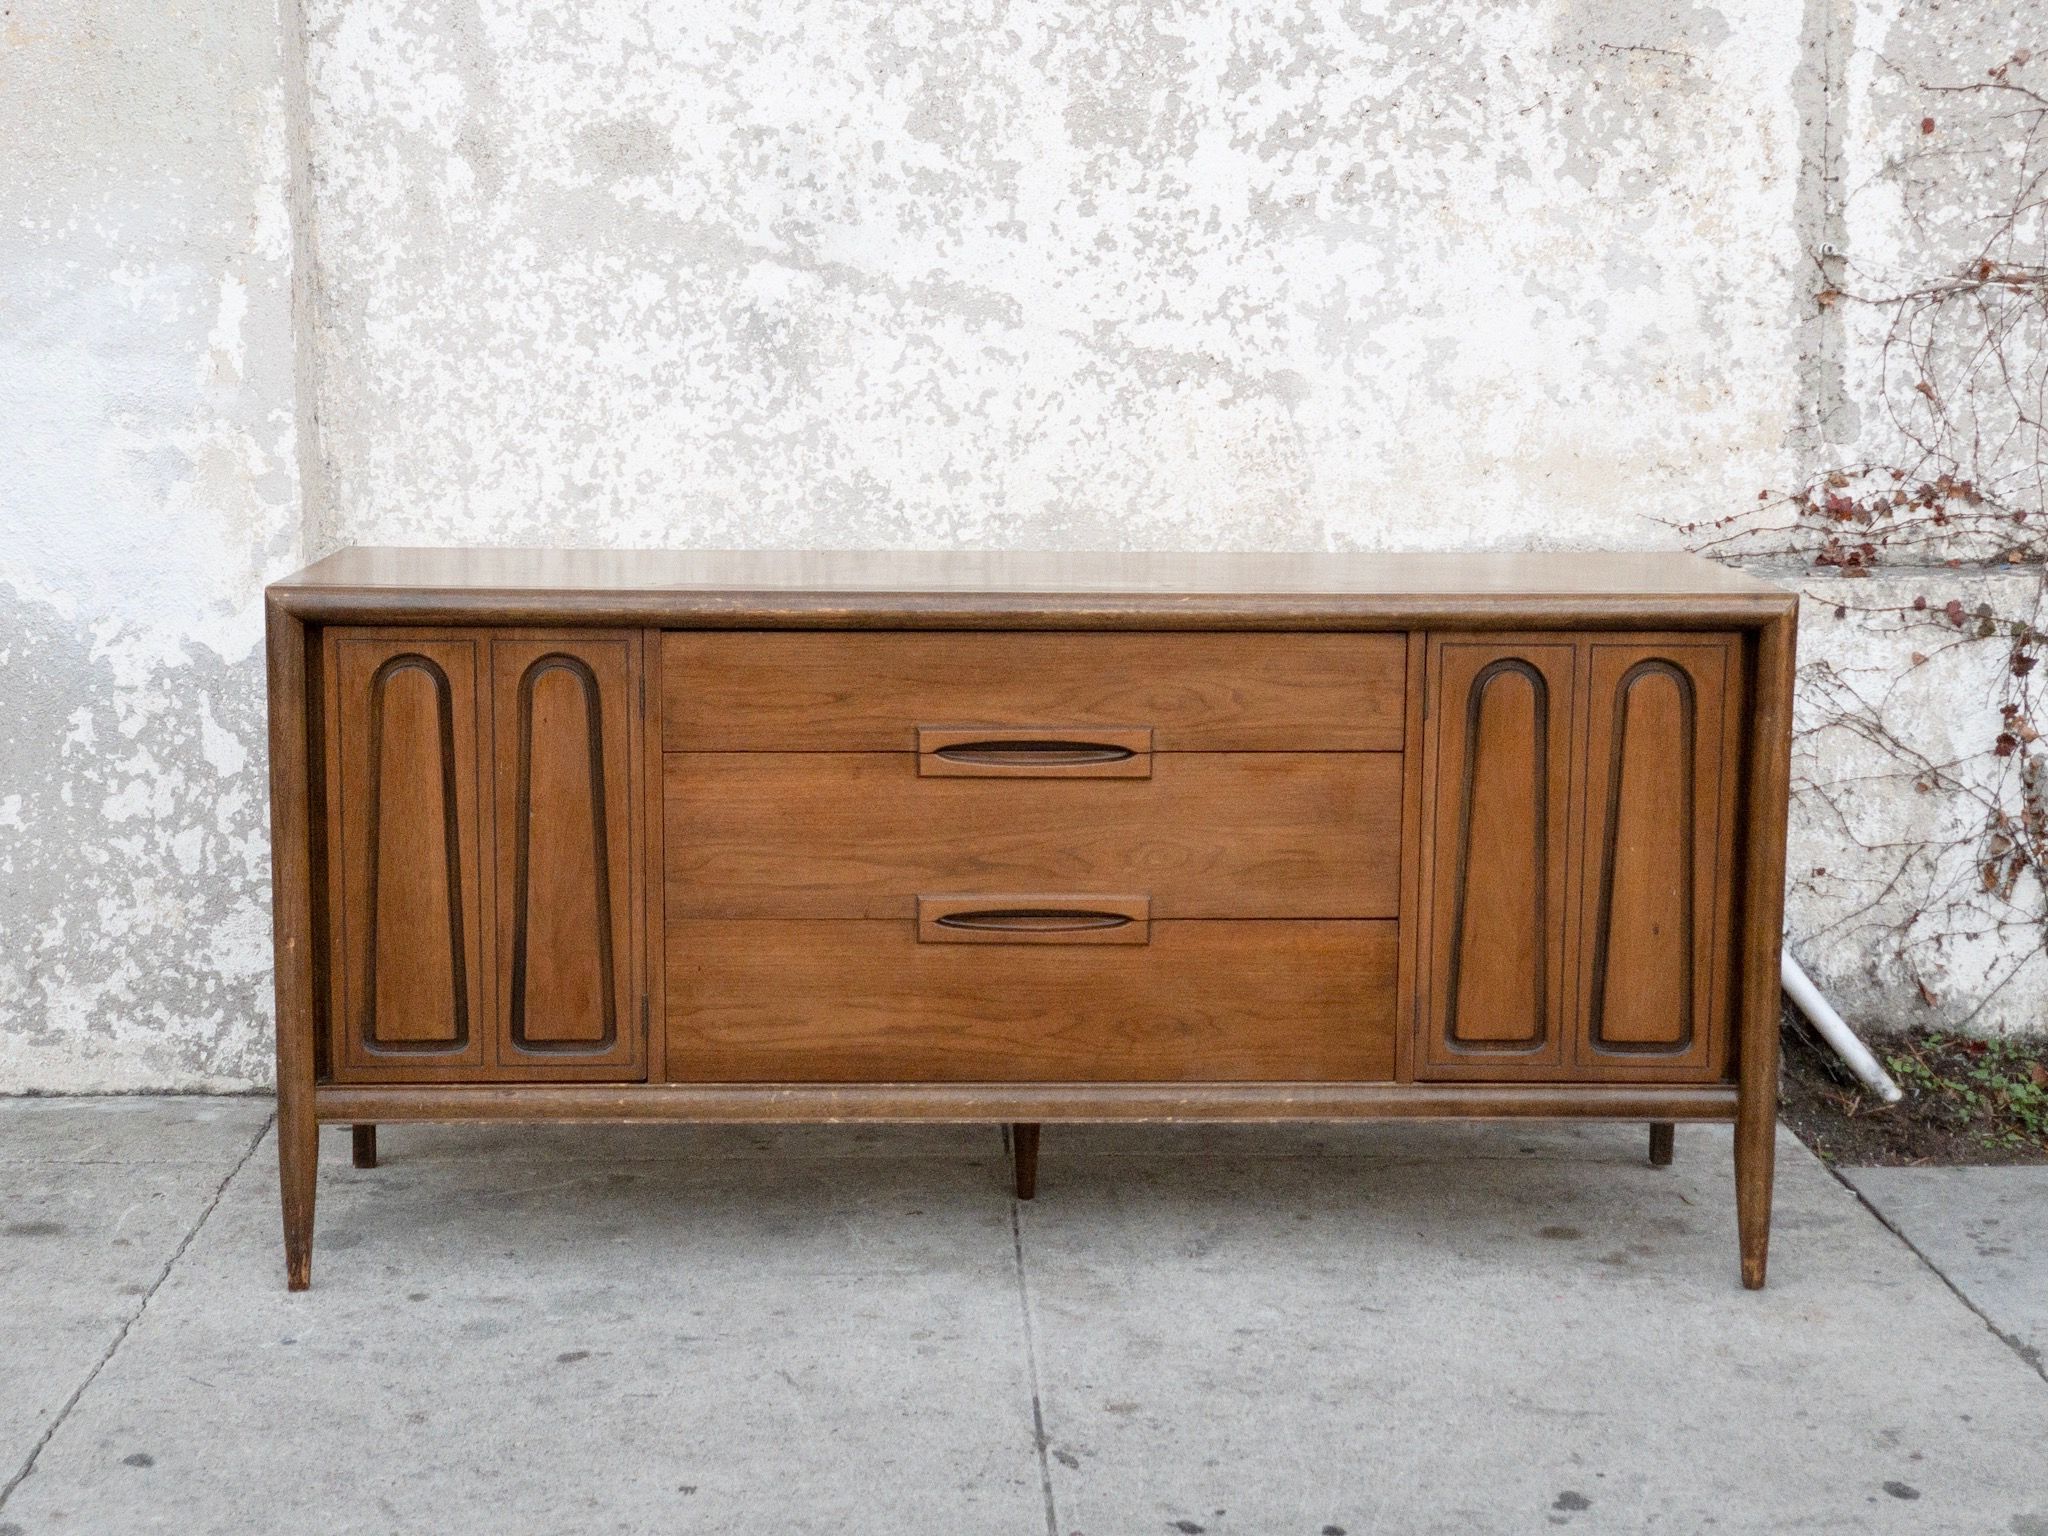 Vintage Bassett Credenza | Another New Place In 2019 Throughout Candide Wood Credenzas (Gallery 8 of 20)